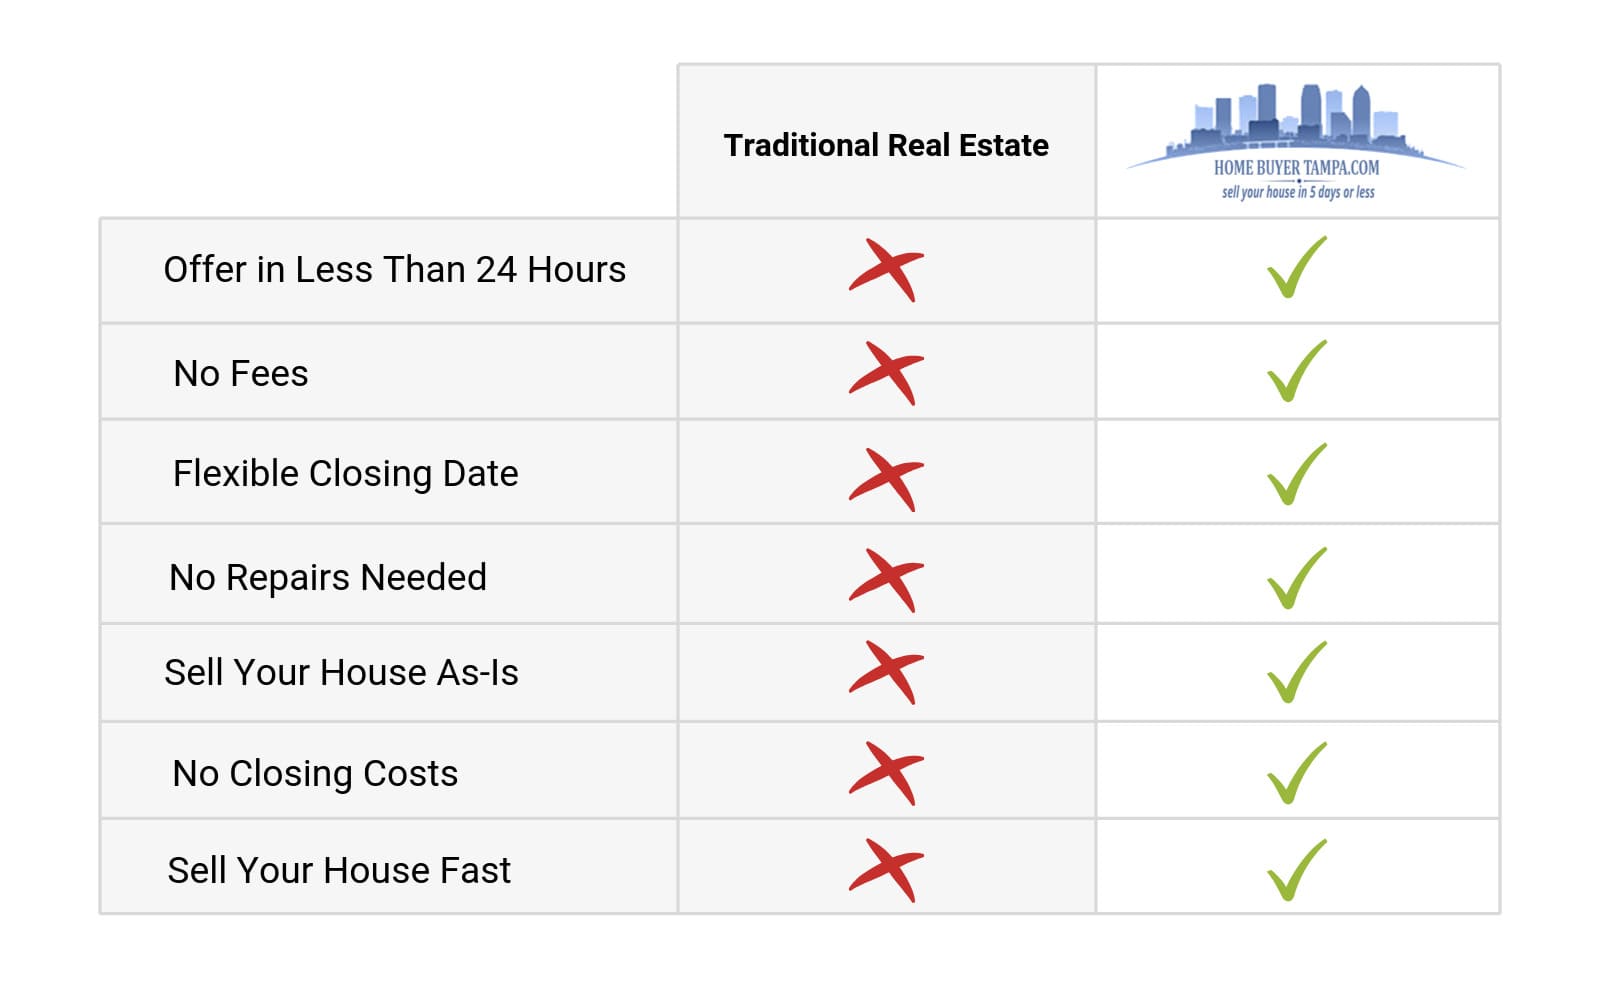 Traditional Real Estate vs Selling to Home Buyer Tampa